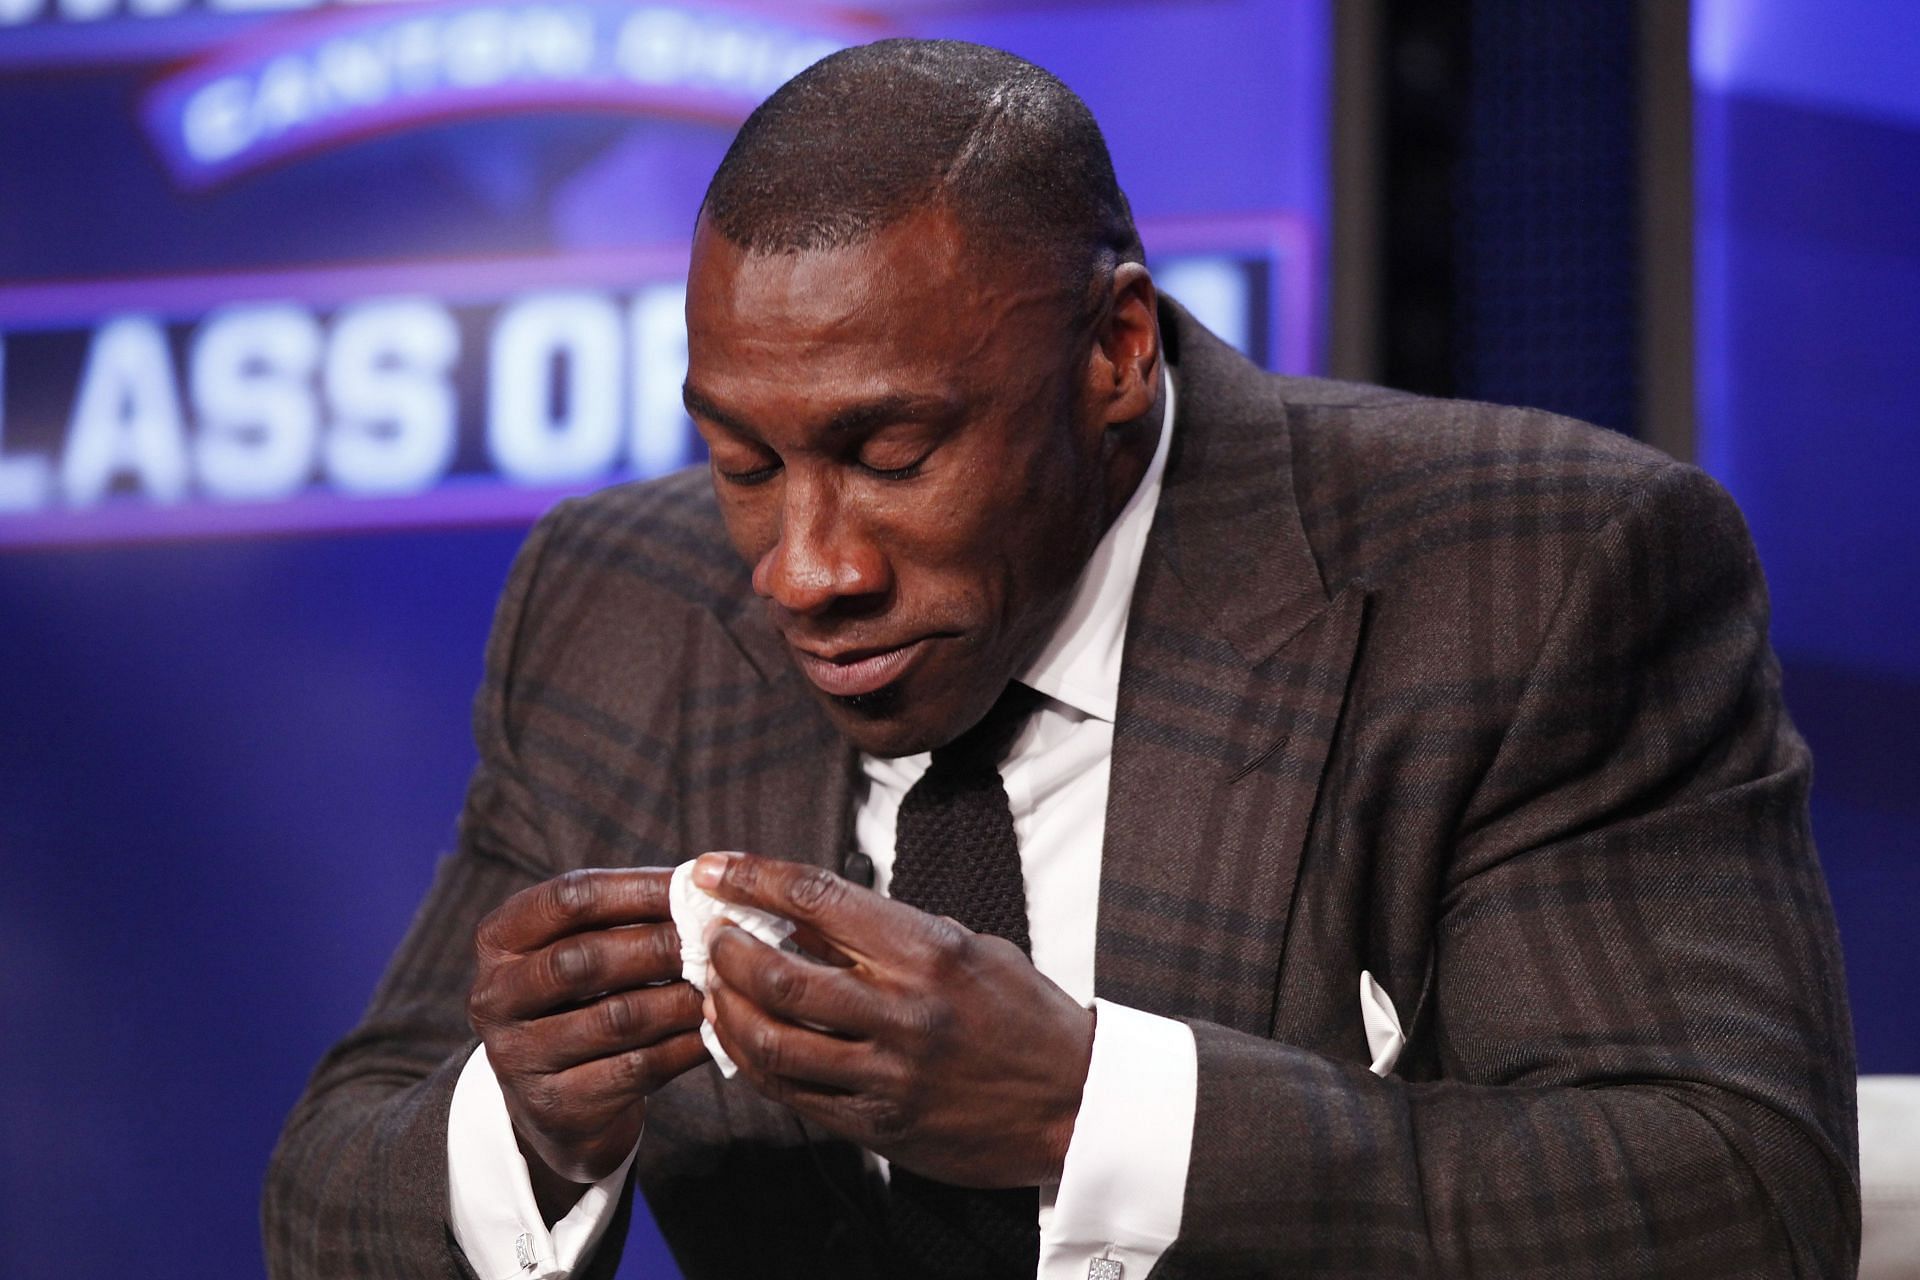 Shannon Sharpe expressed his grief at the passing away of Tony Siragusa (File photo)